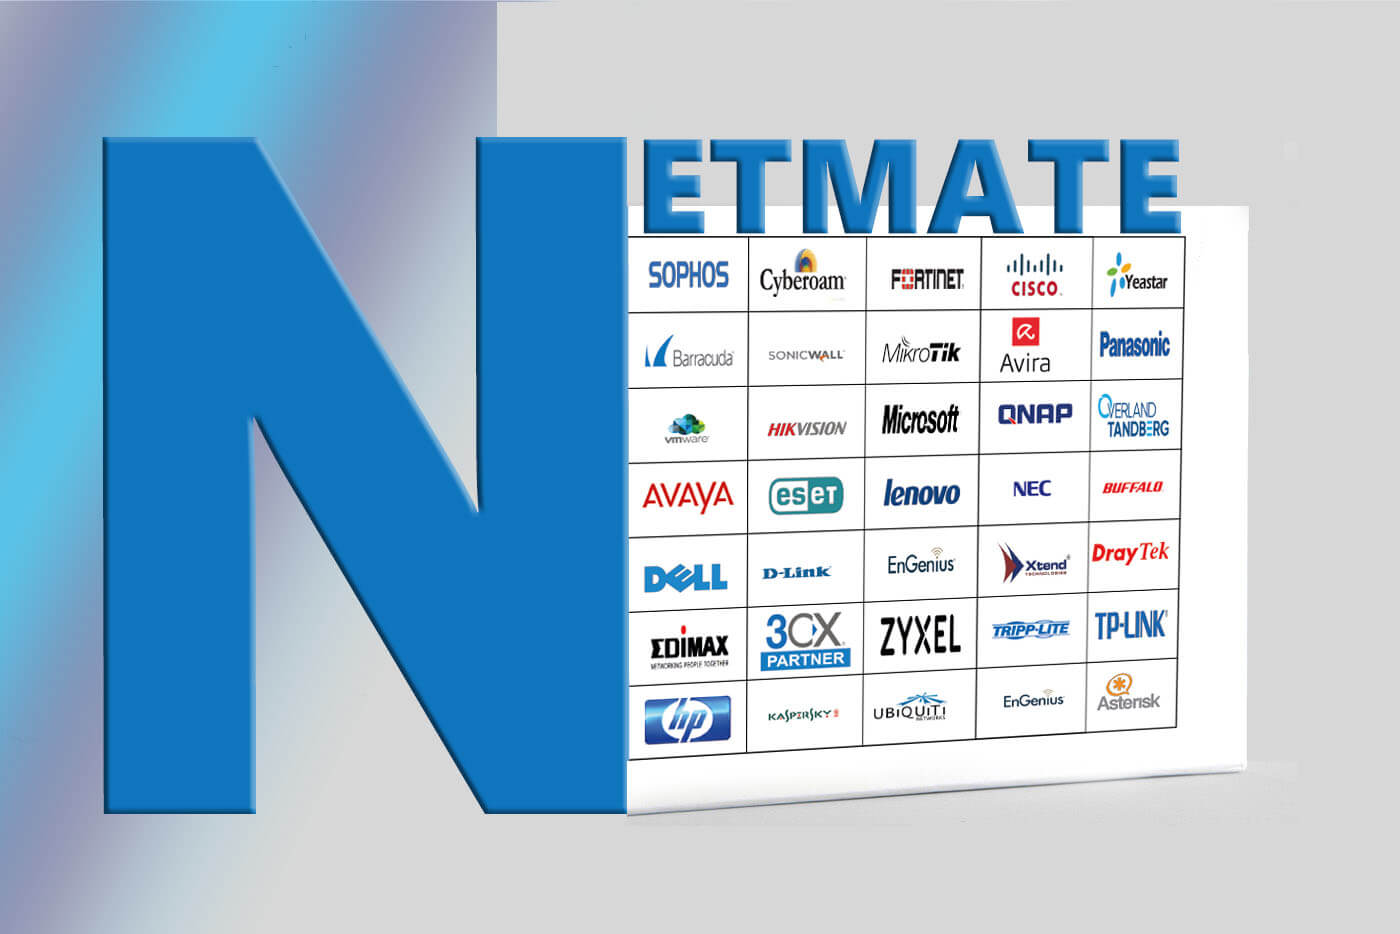 Netmate IT Services-The best IT Services and IT Solutions in Dubai